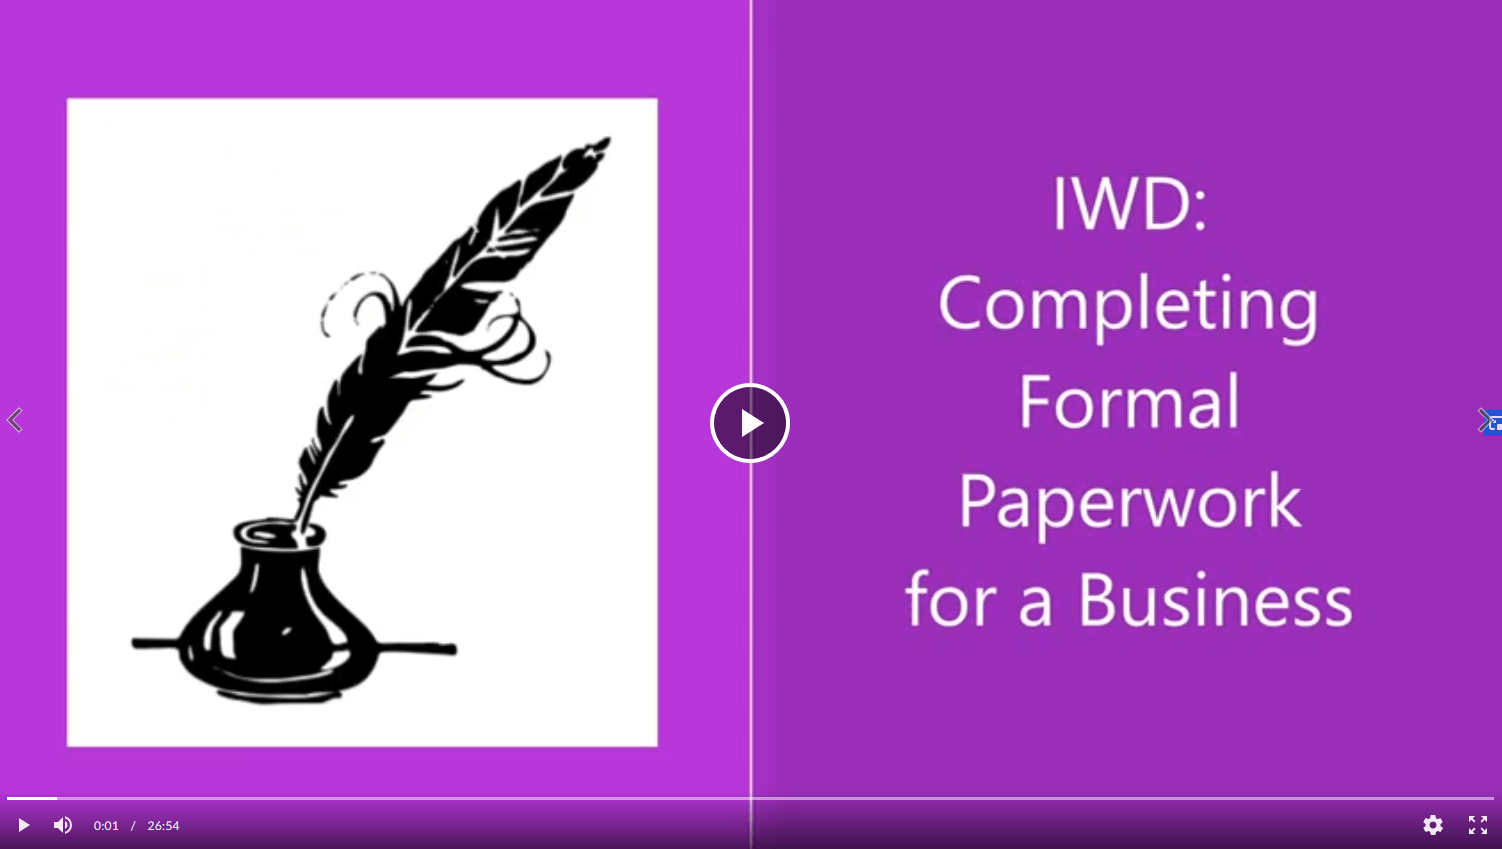 IWD: Completing Formal Paperwork for a Business